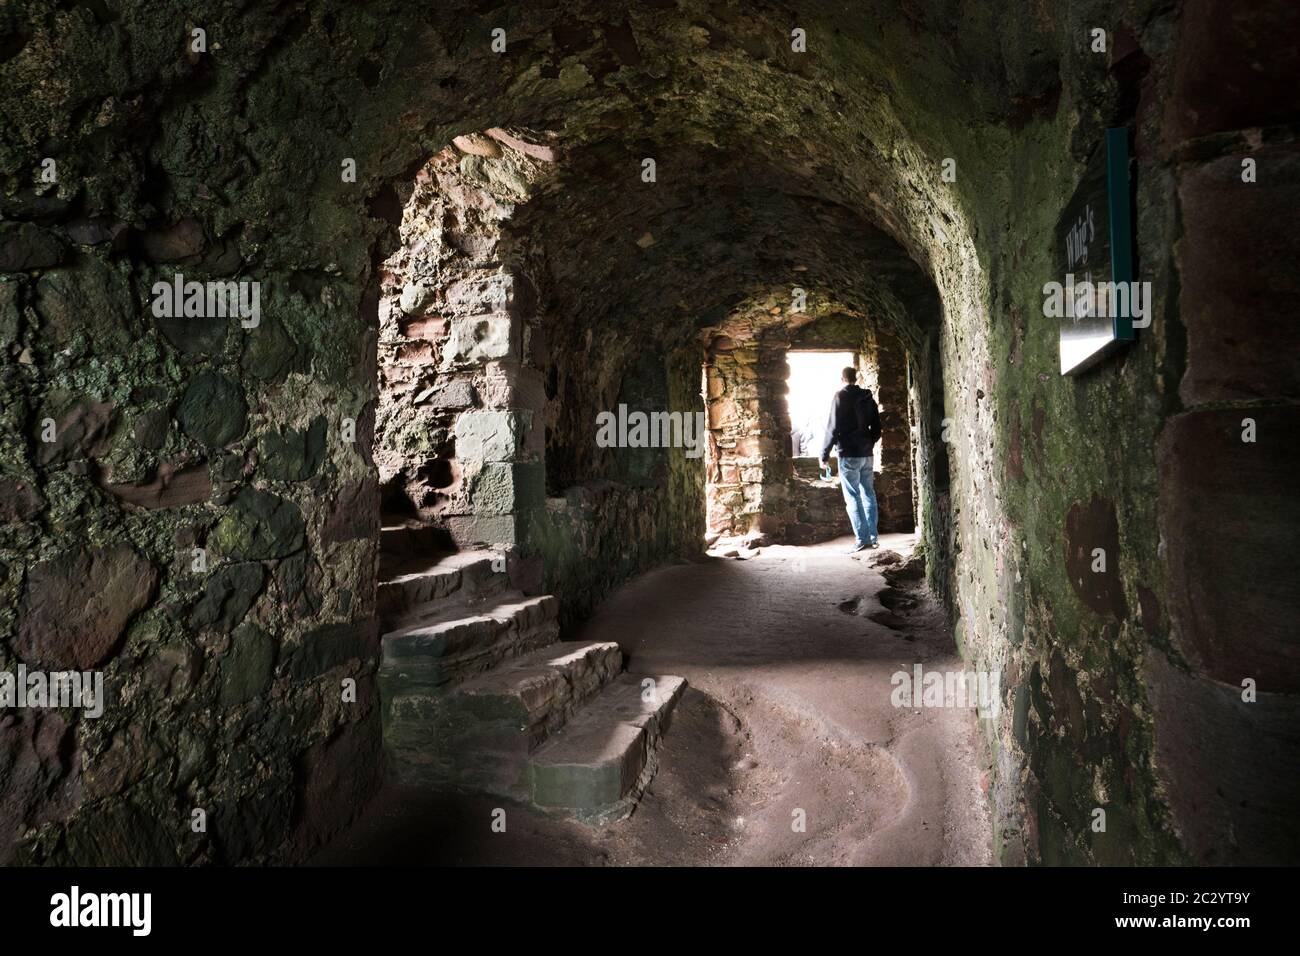 An adult man explores an old abandoned stone ruin with a curved ceiling along the corridor with stairs and a window inside Dunnottar castle; Scotland, Stock Photo